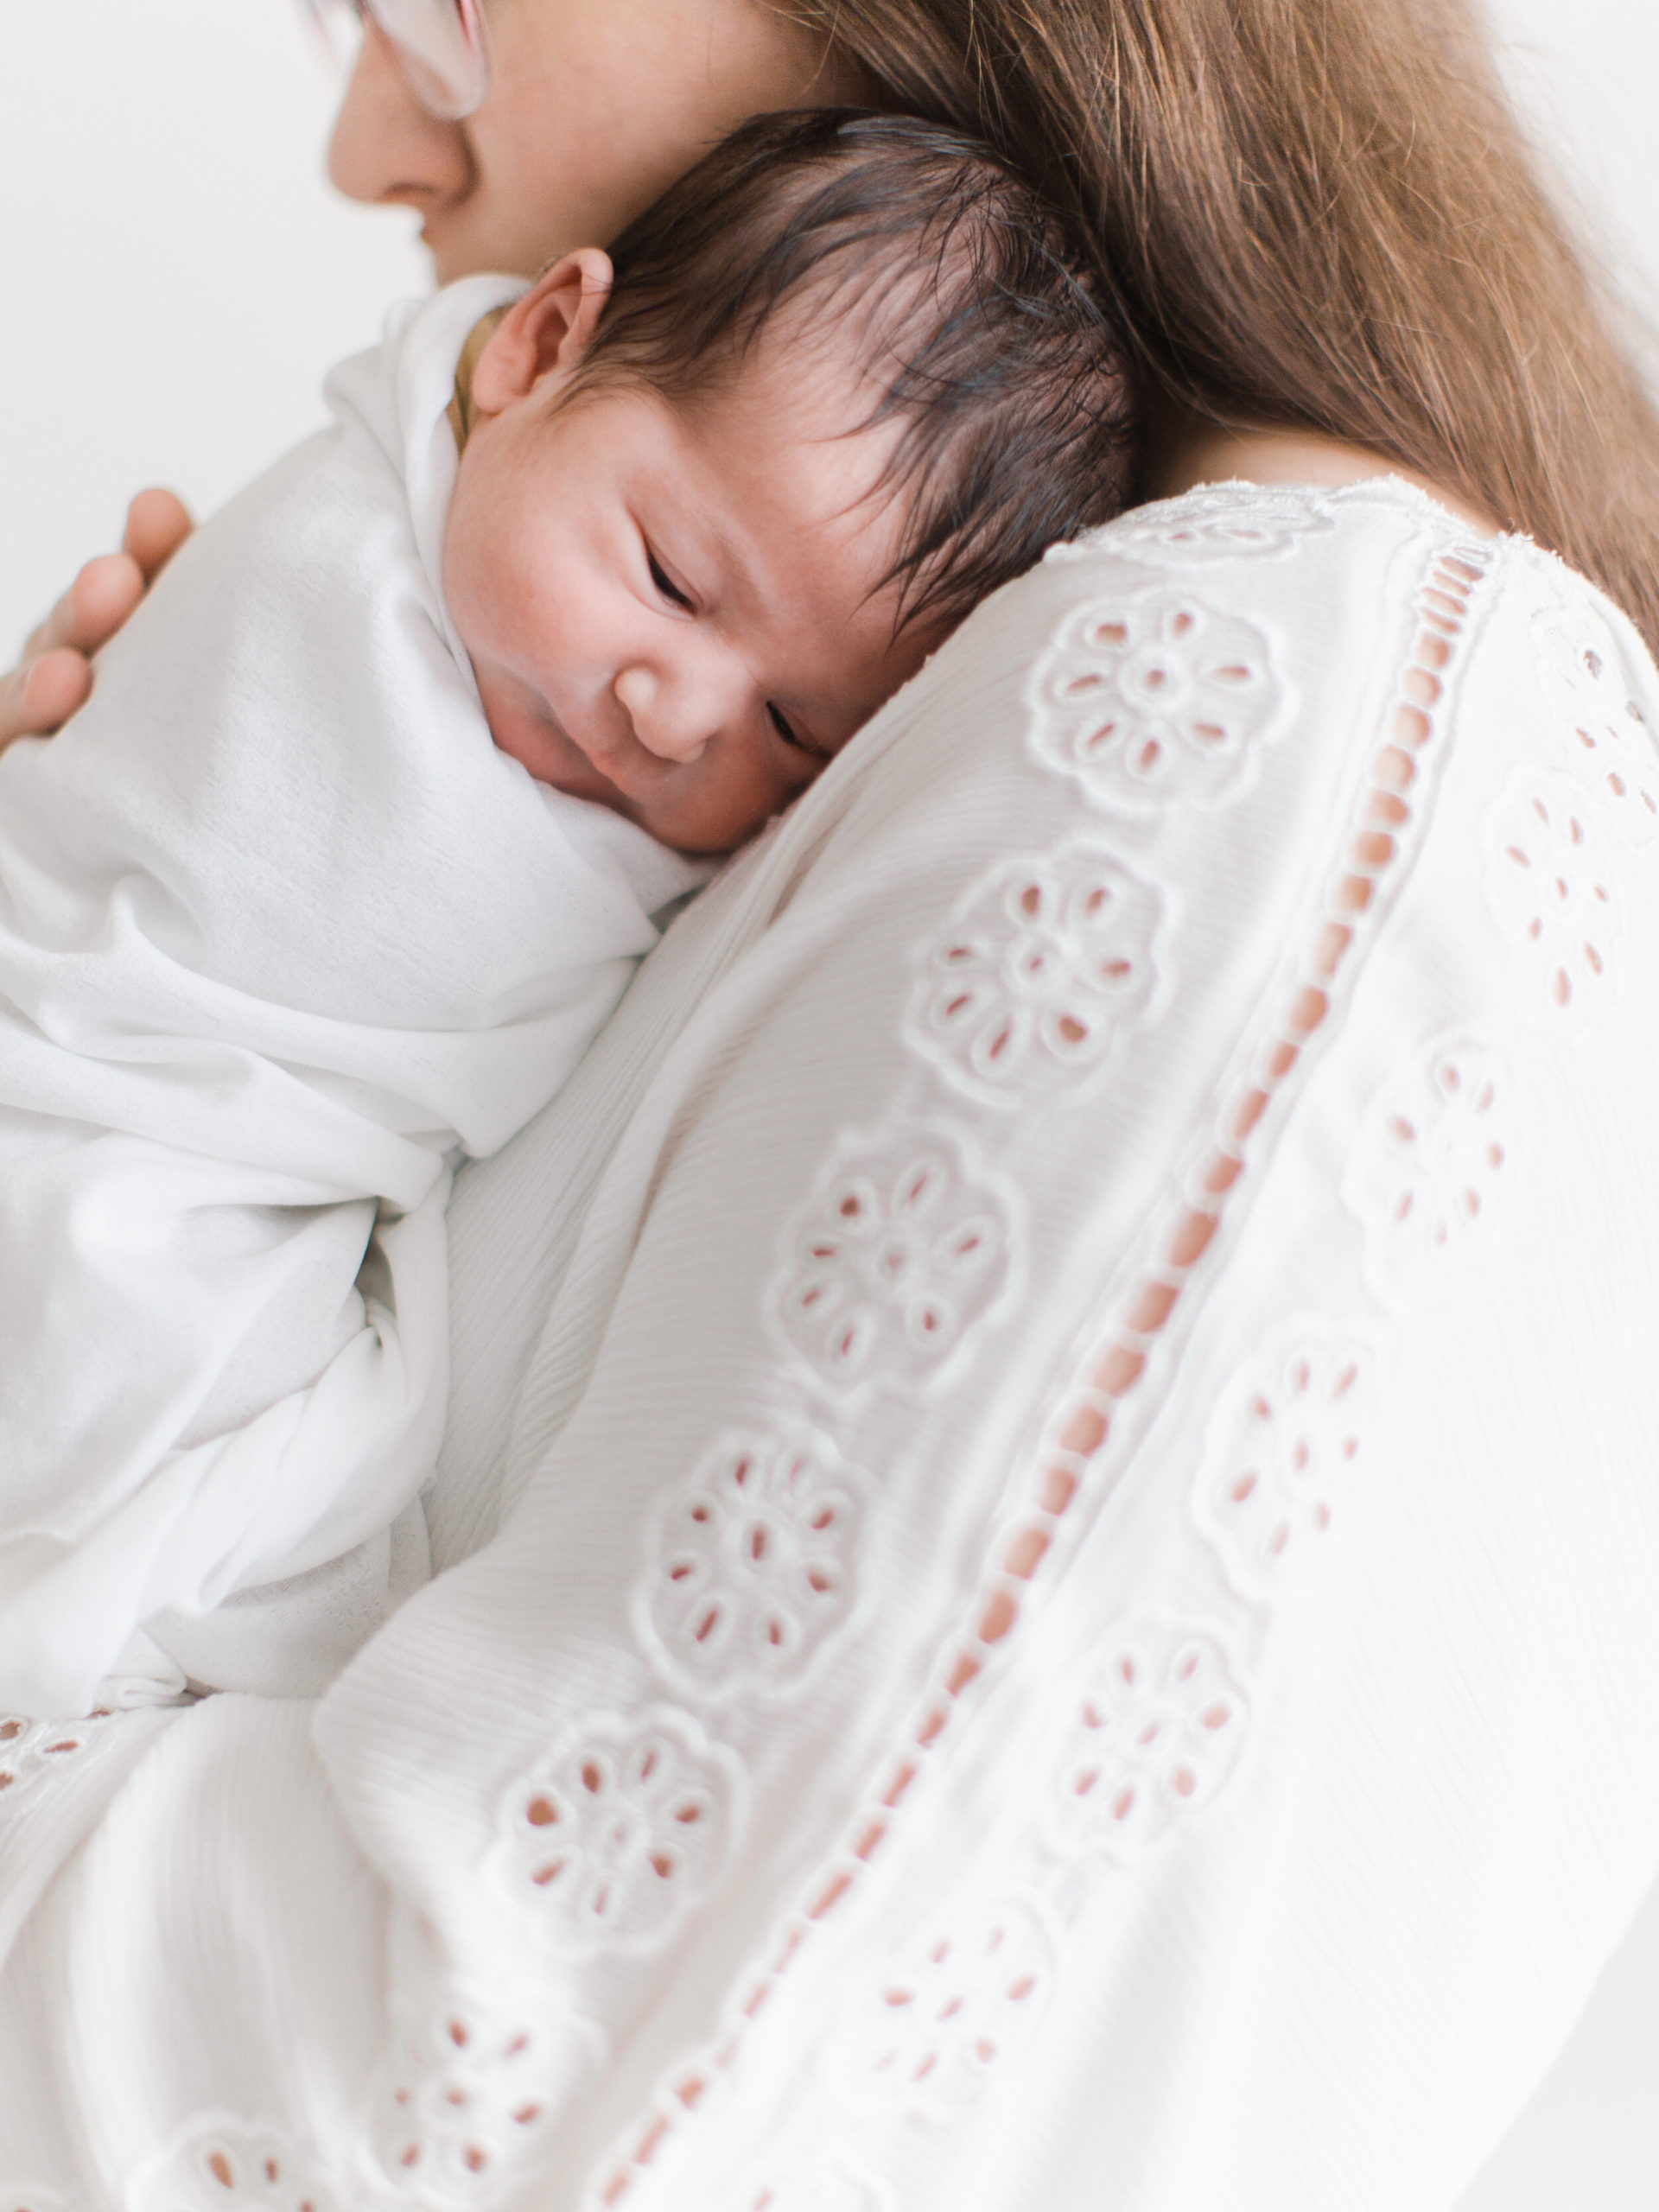 Details of newborn during timeless portrait session